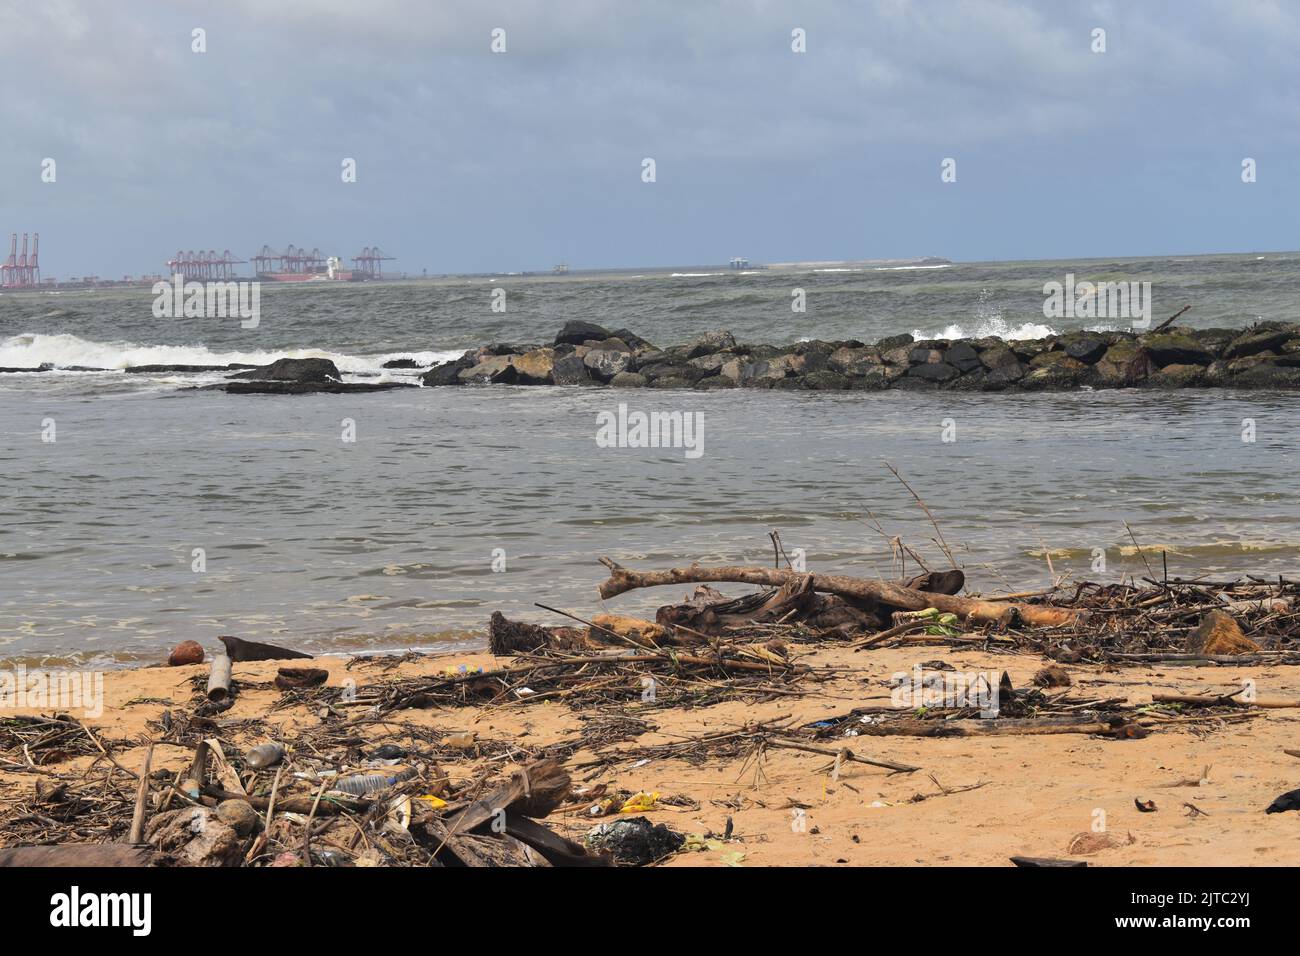 Wood and plastic wastage has washed ashore due to rough seas in the Indian ocean in the outskirts of Colombo. Sri Lanka. Stock Photo